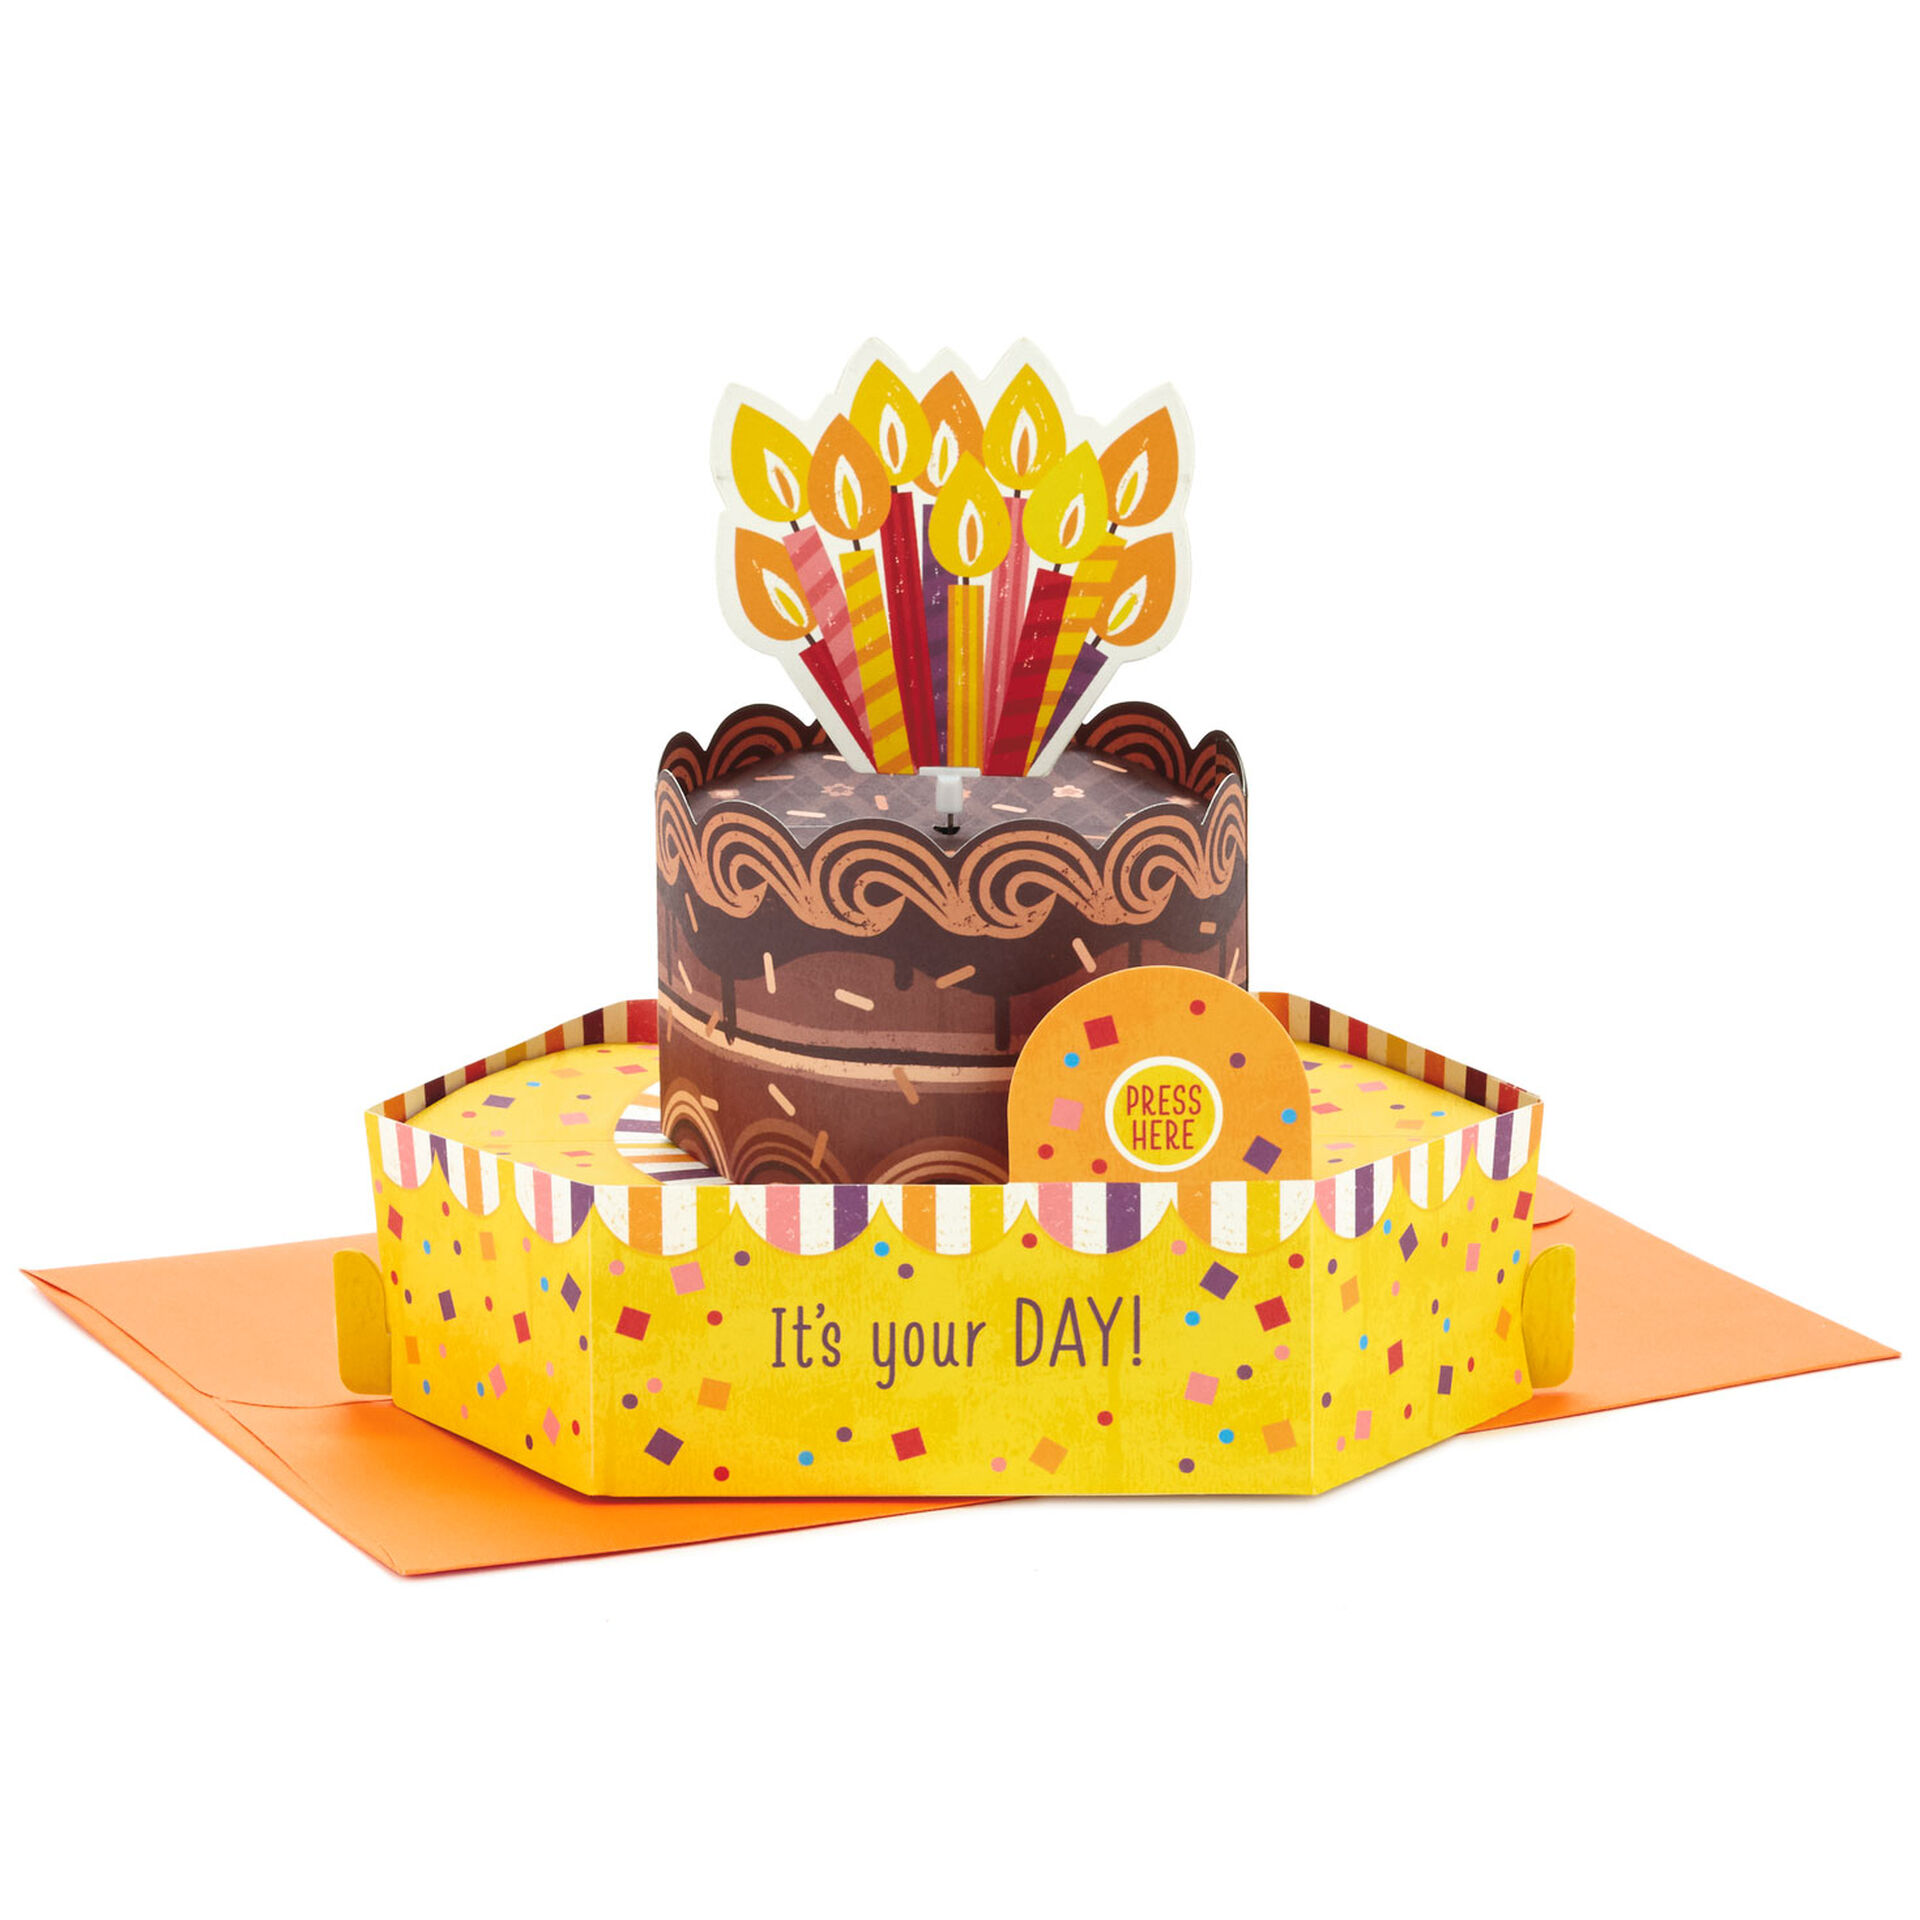 Cake-Music-and-Motion-3D-PopUp-Birthday-Card_1199ARH1377_01